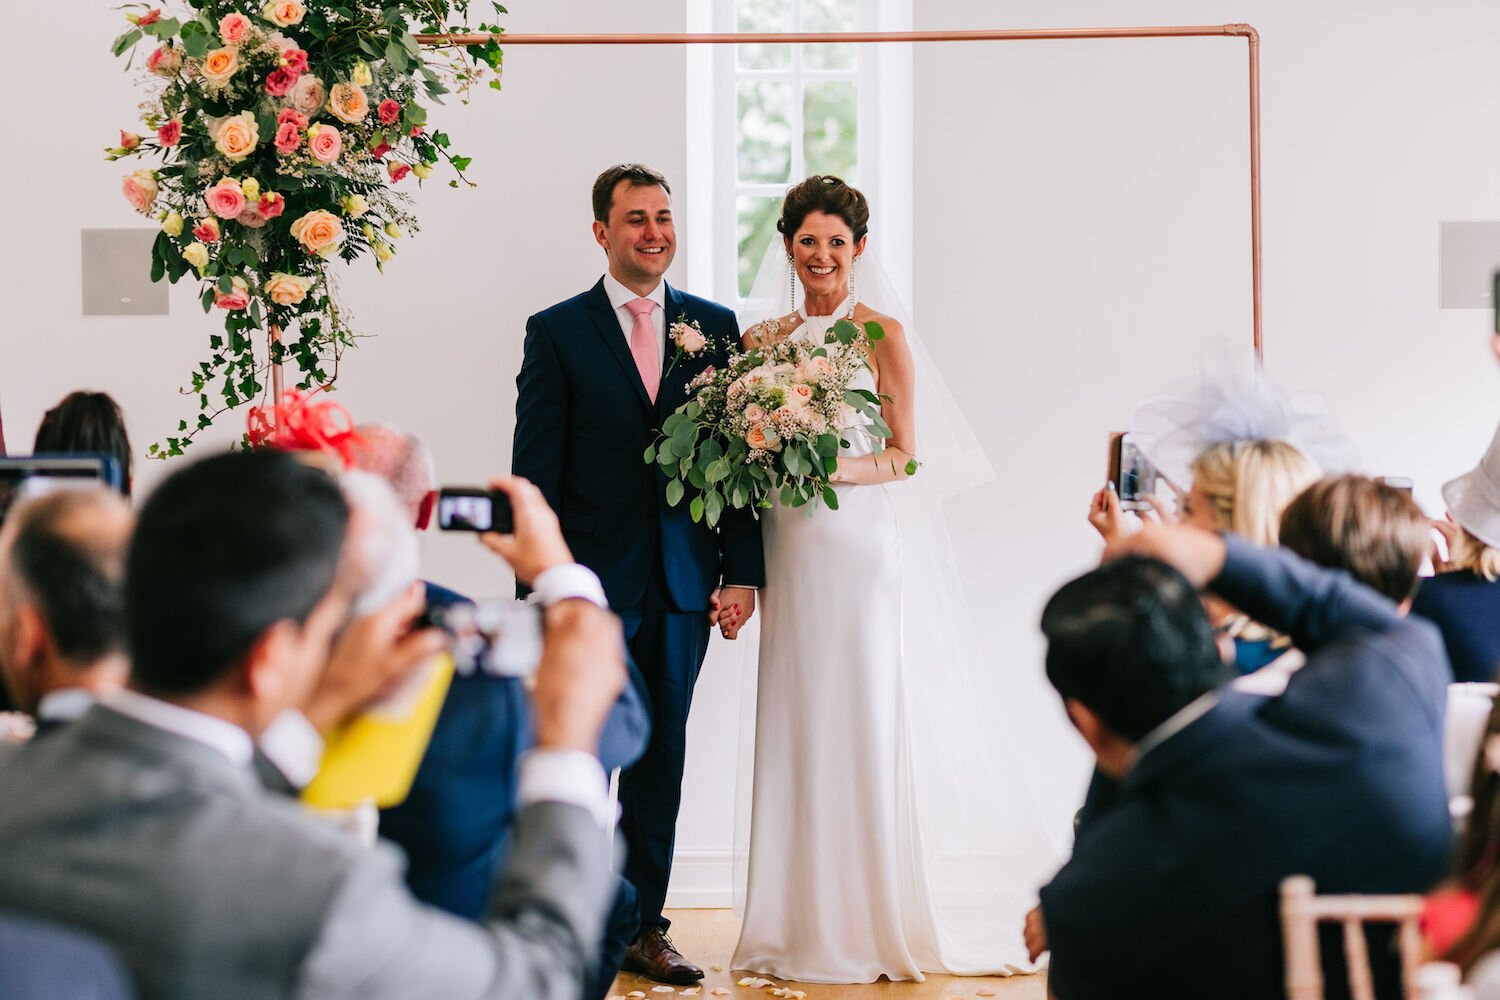 Beautiful bride Carly wore a wedding dress by Halfpenny London